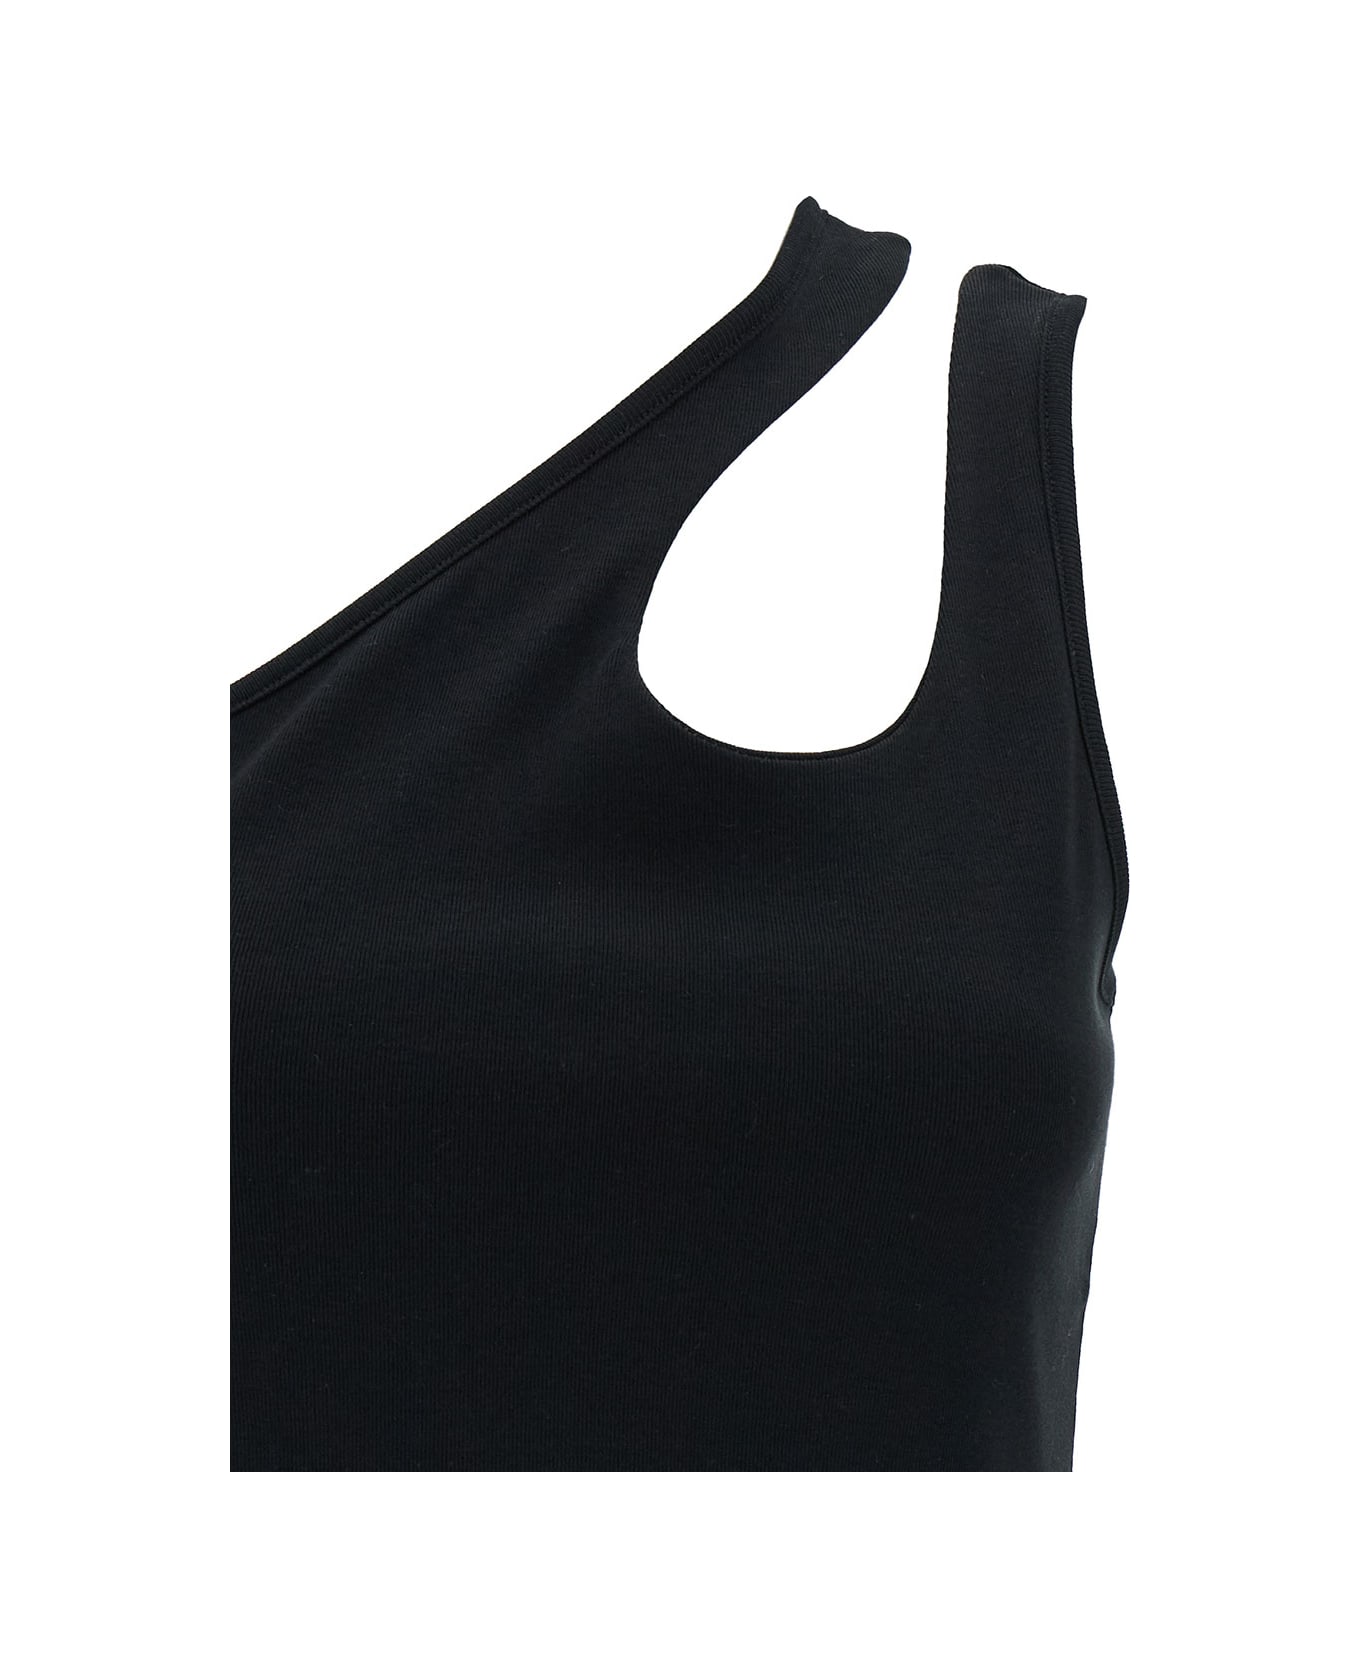 Federica Tosi Black One-shoulder Top With Cut-out In Ribbed Cotton Woman - Black タンクトップ